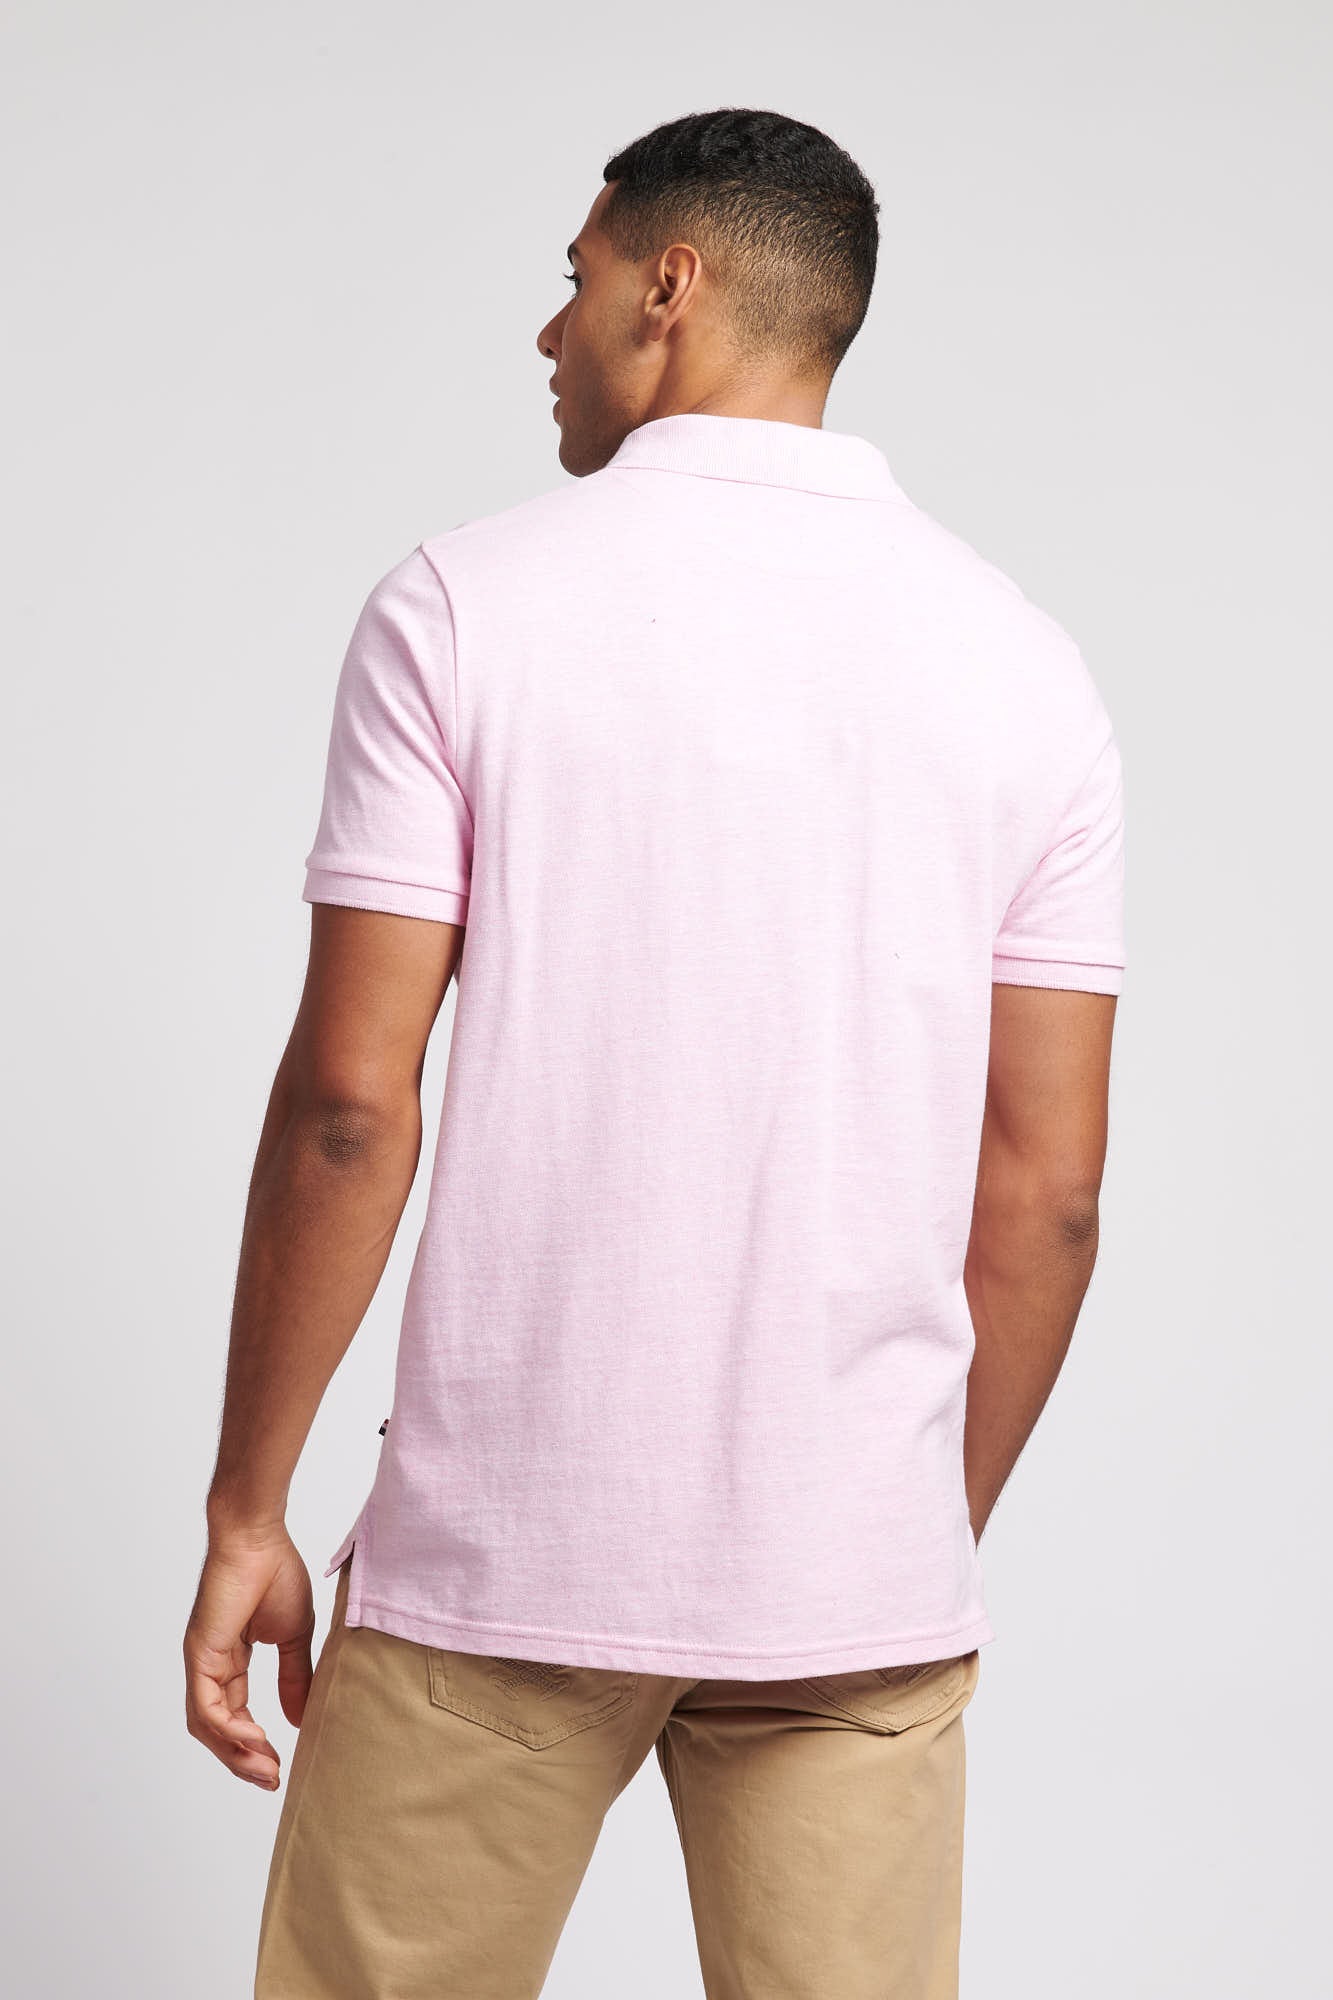 Mens Pique Polo Shirt in Orchid Pink Marl